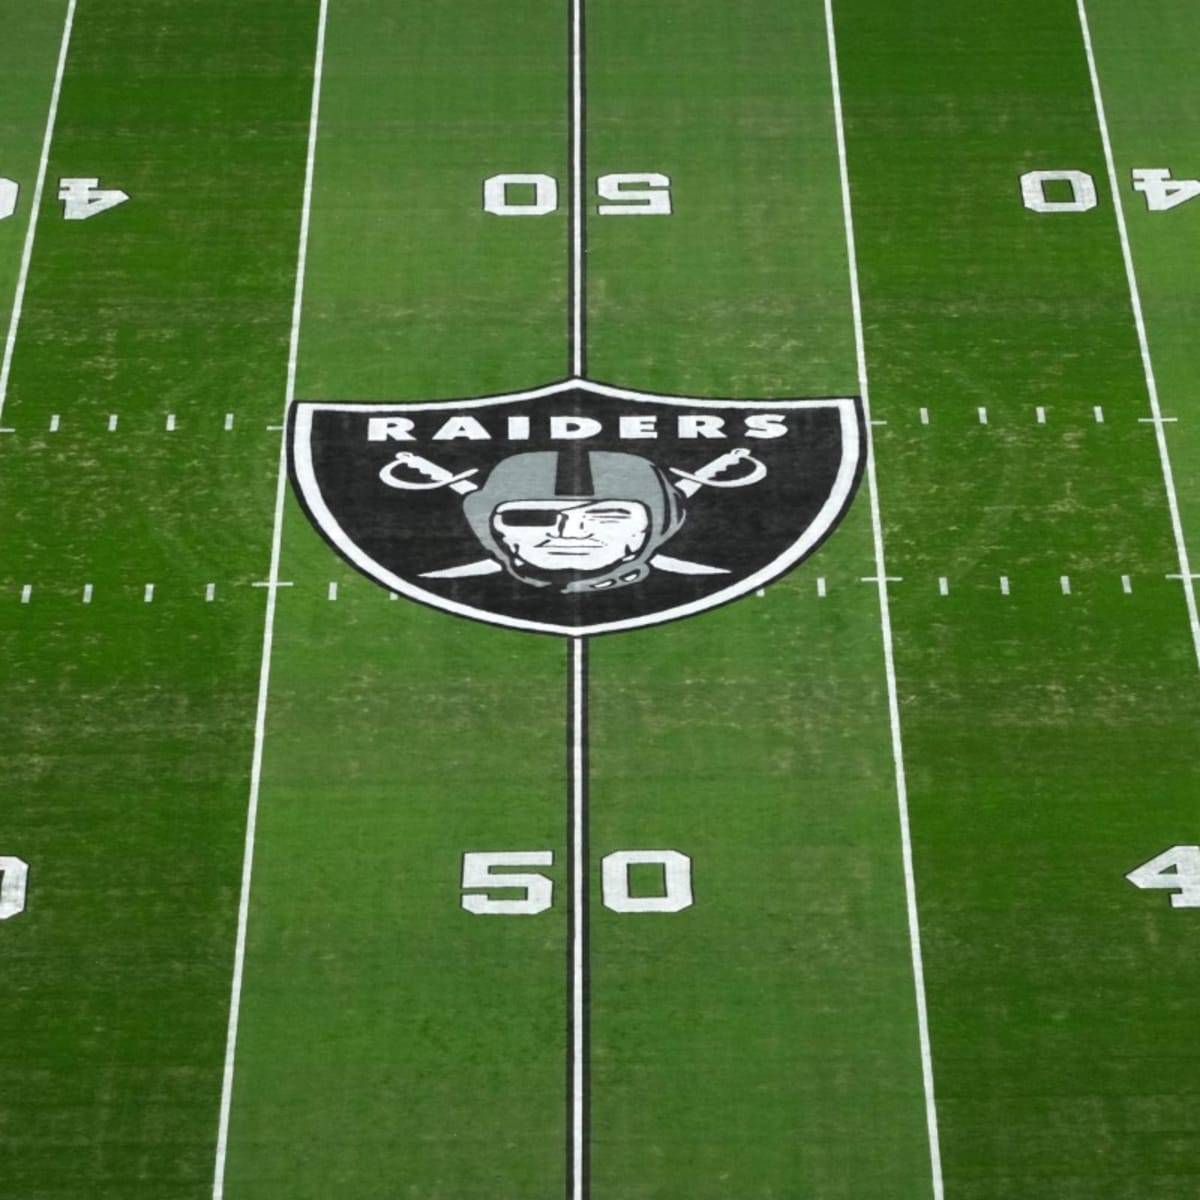 Las Vegas Raiders schedule 2023: Dates, opponents, game times, SOS